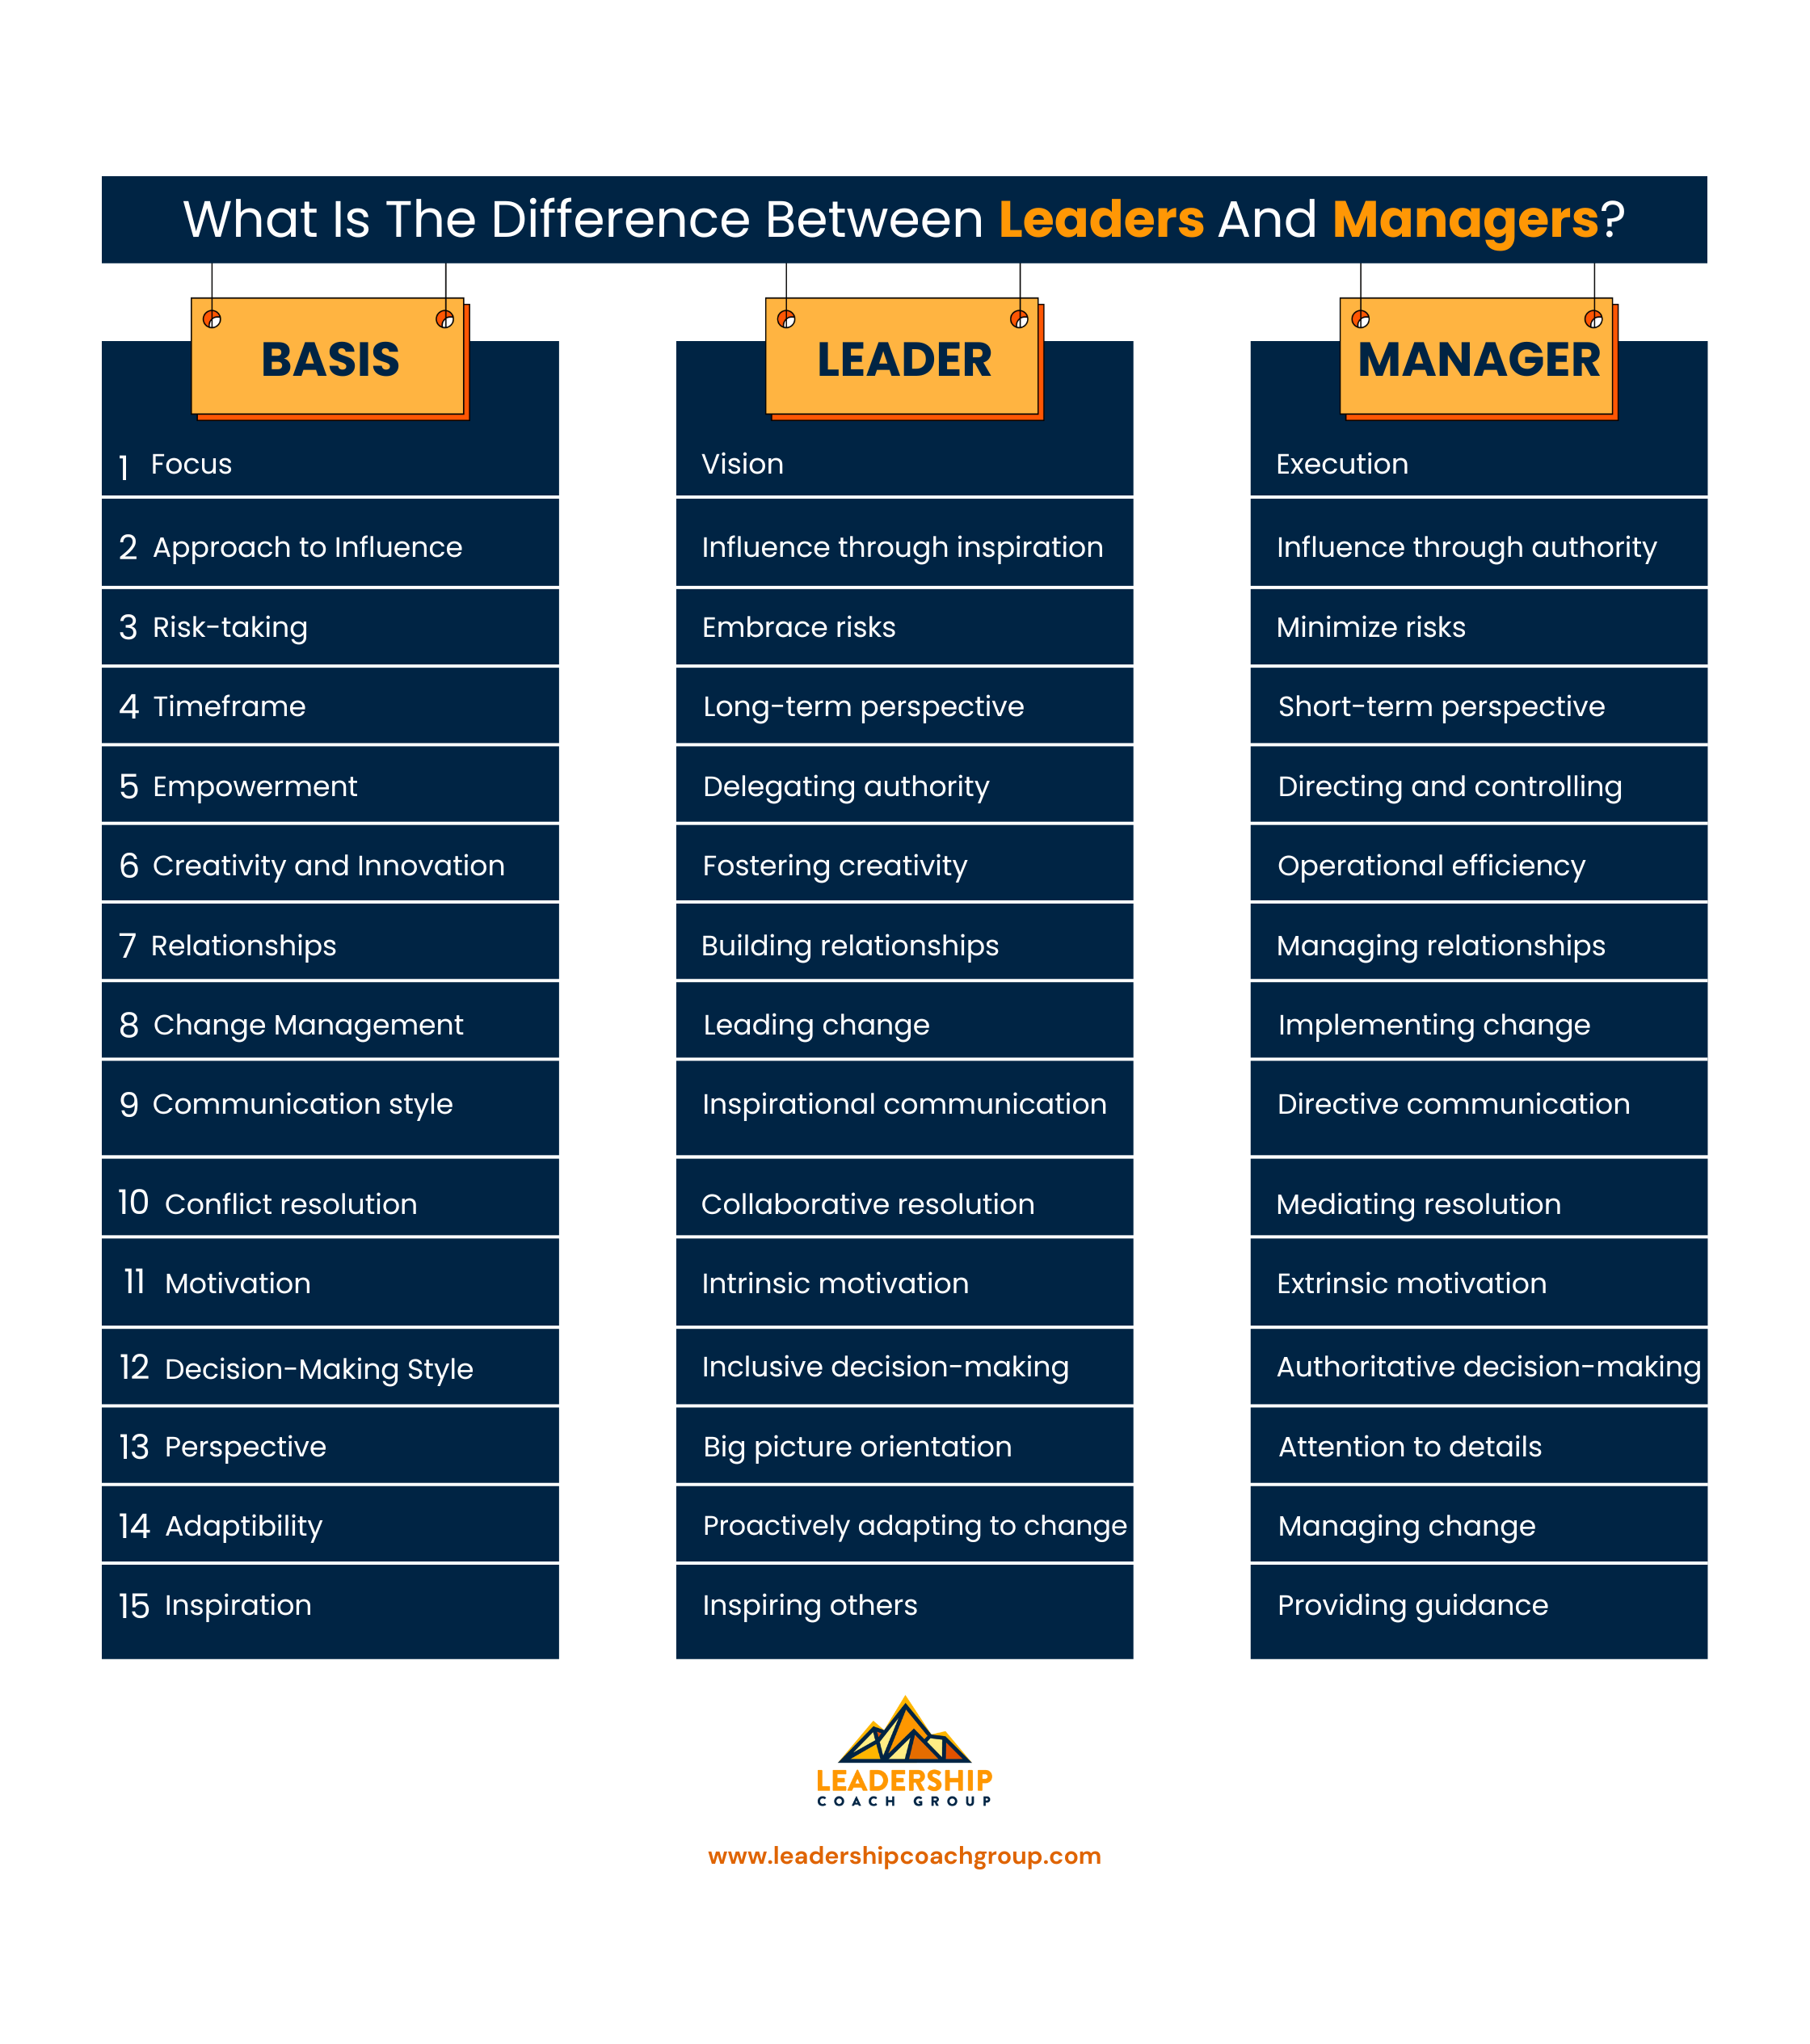 What is the difference between leaders and managers - Infographic